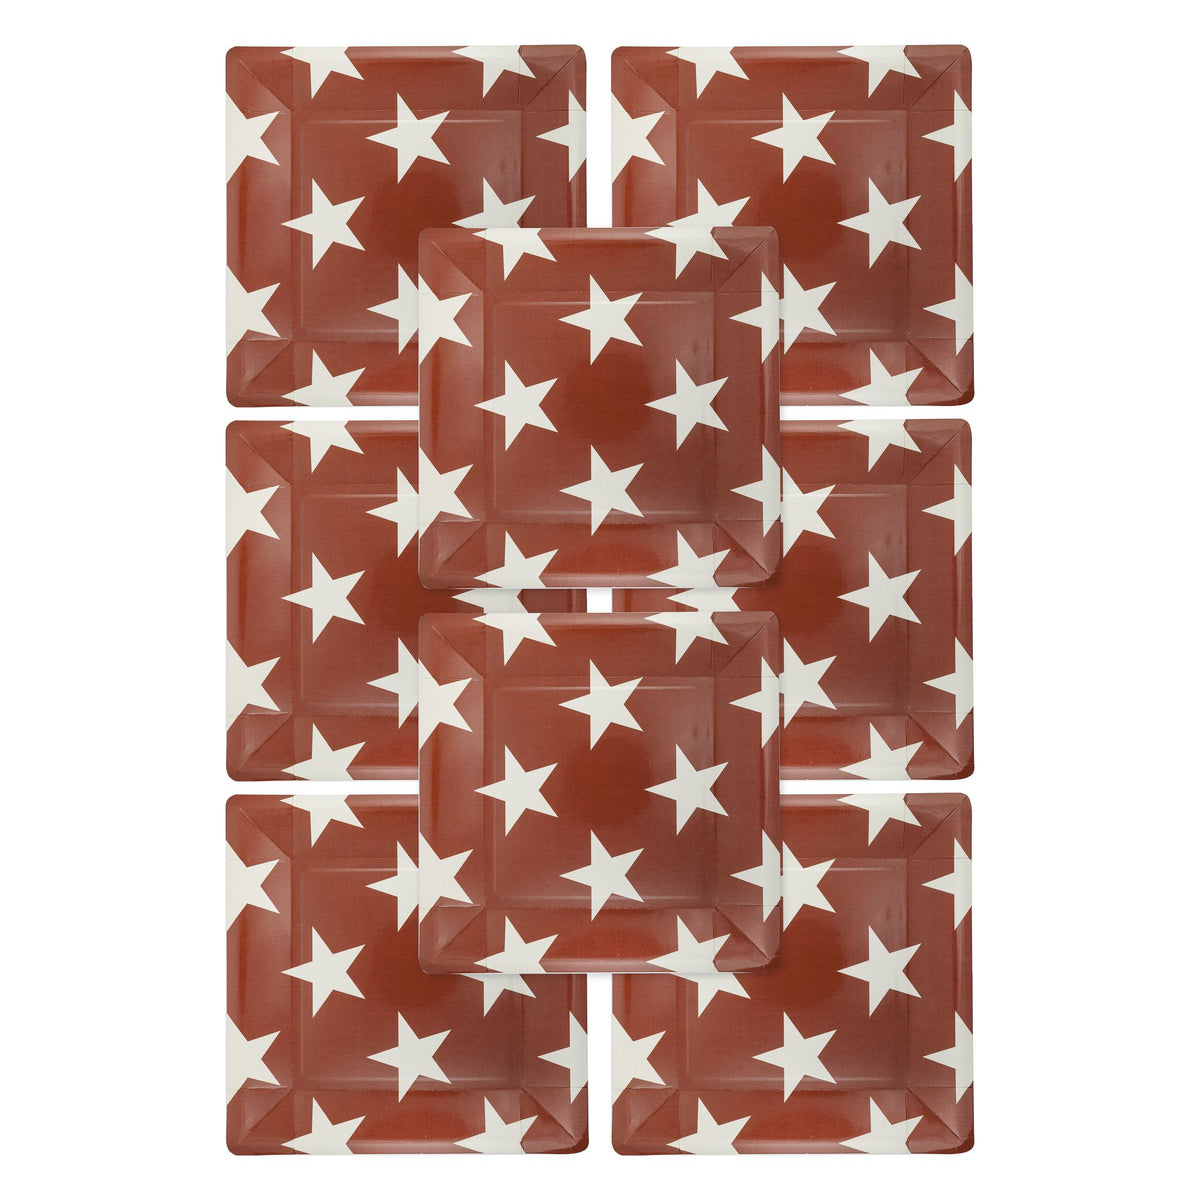 Hamptons Square Red Star Paper Plates - The Preppy Bunny